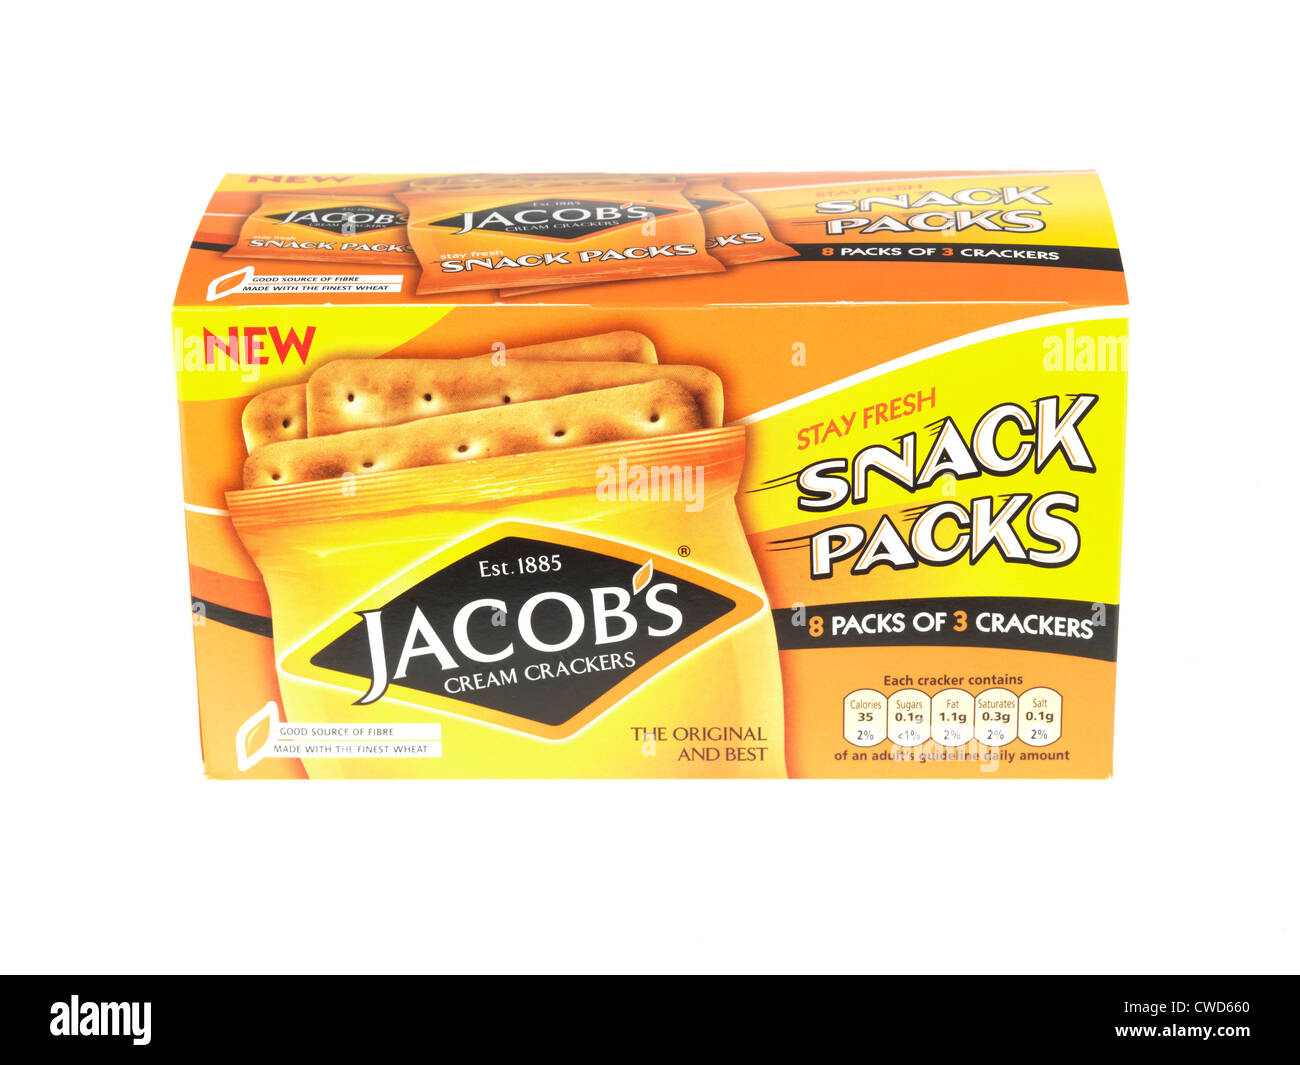 Box Or Carton Of Branded Jacobs Snack Pack Biscuits Isolated Against A White Background with No People And A Clipping Path Stock Photo